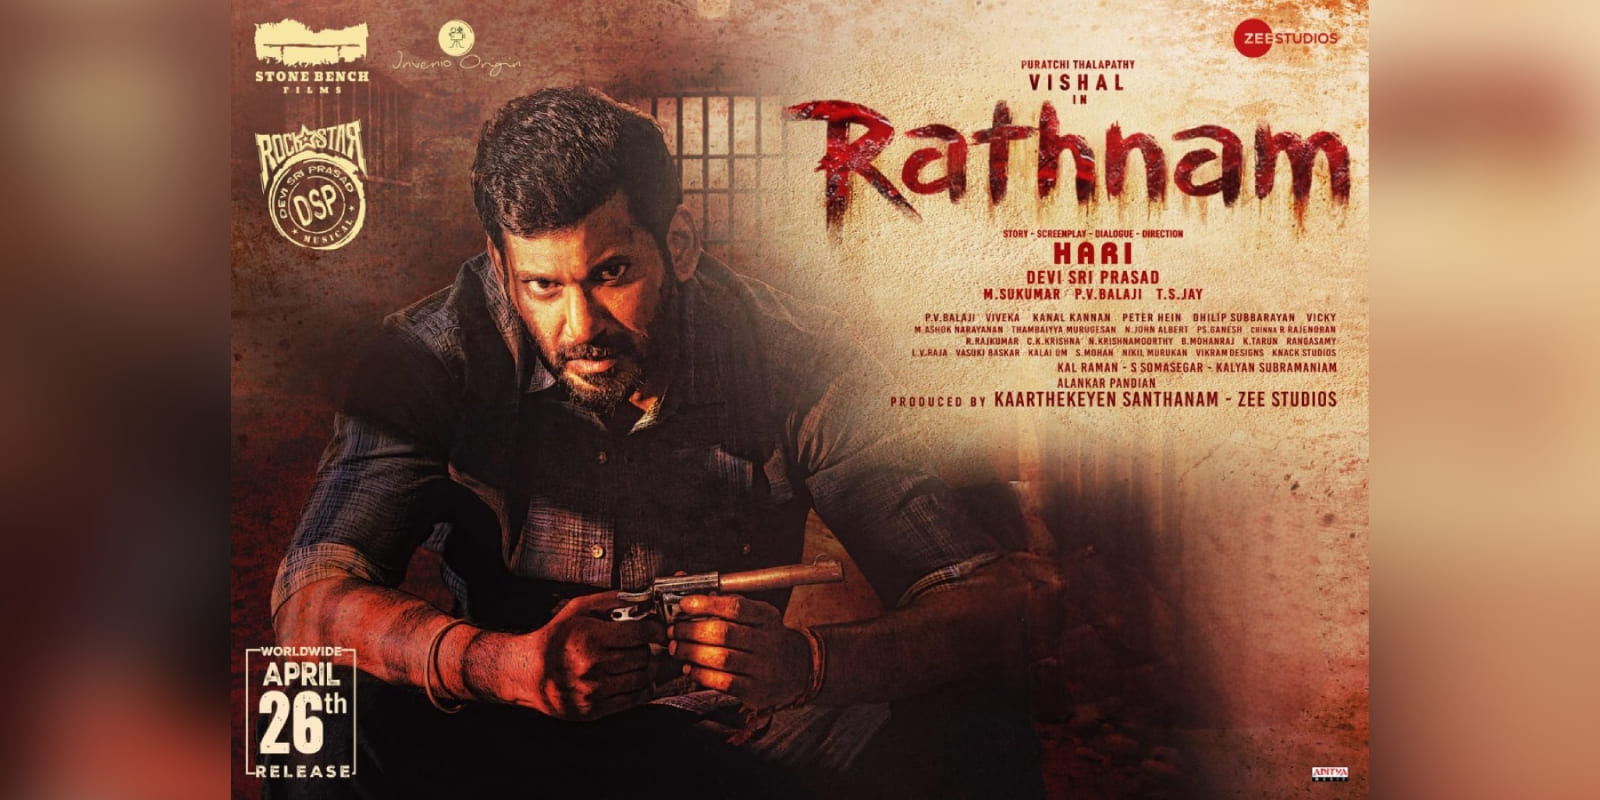 Vishal's latest outing Rathnam is directed by Hari